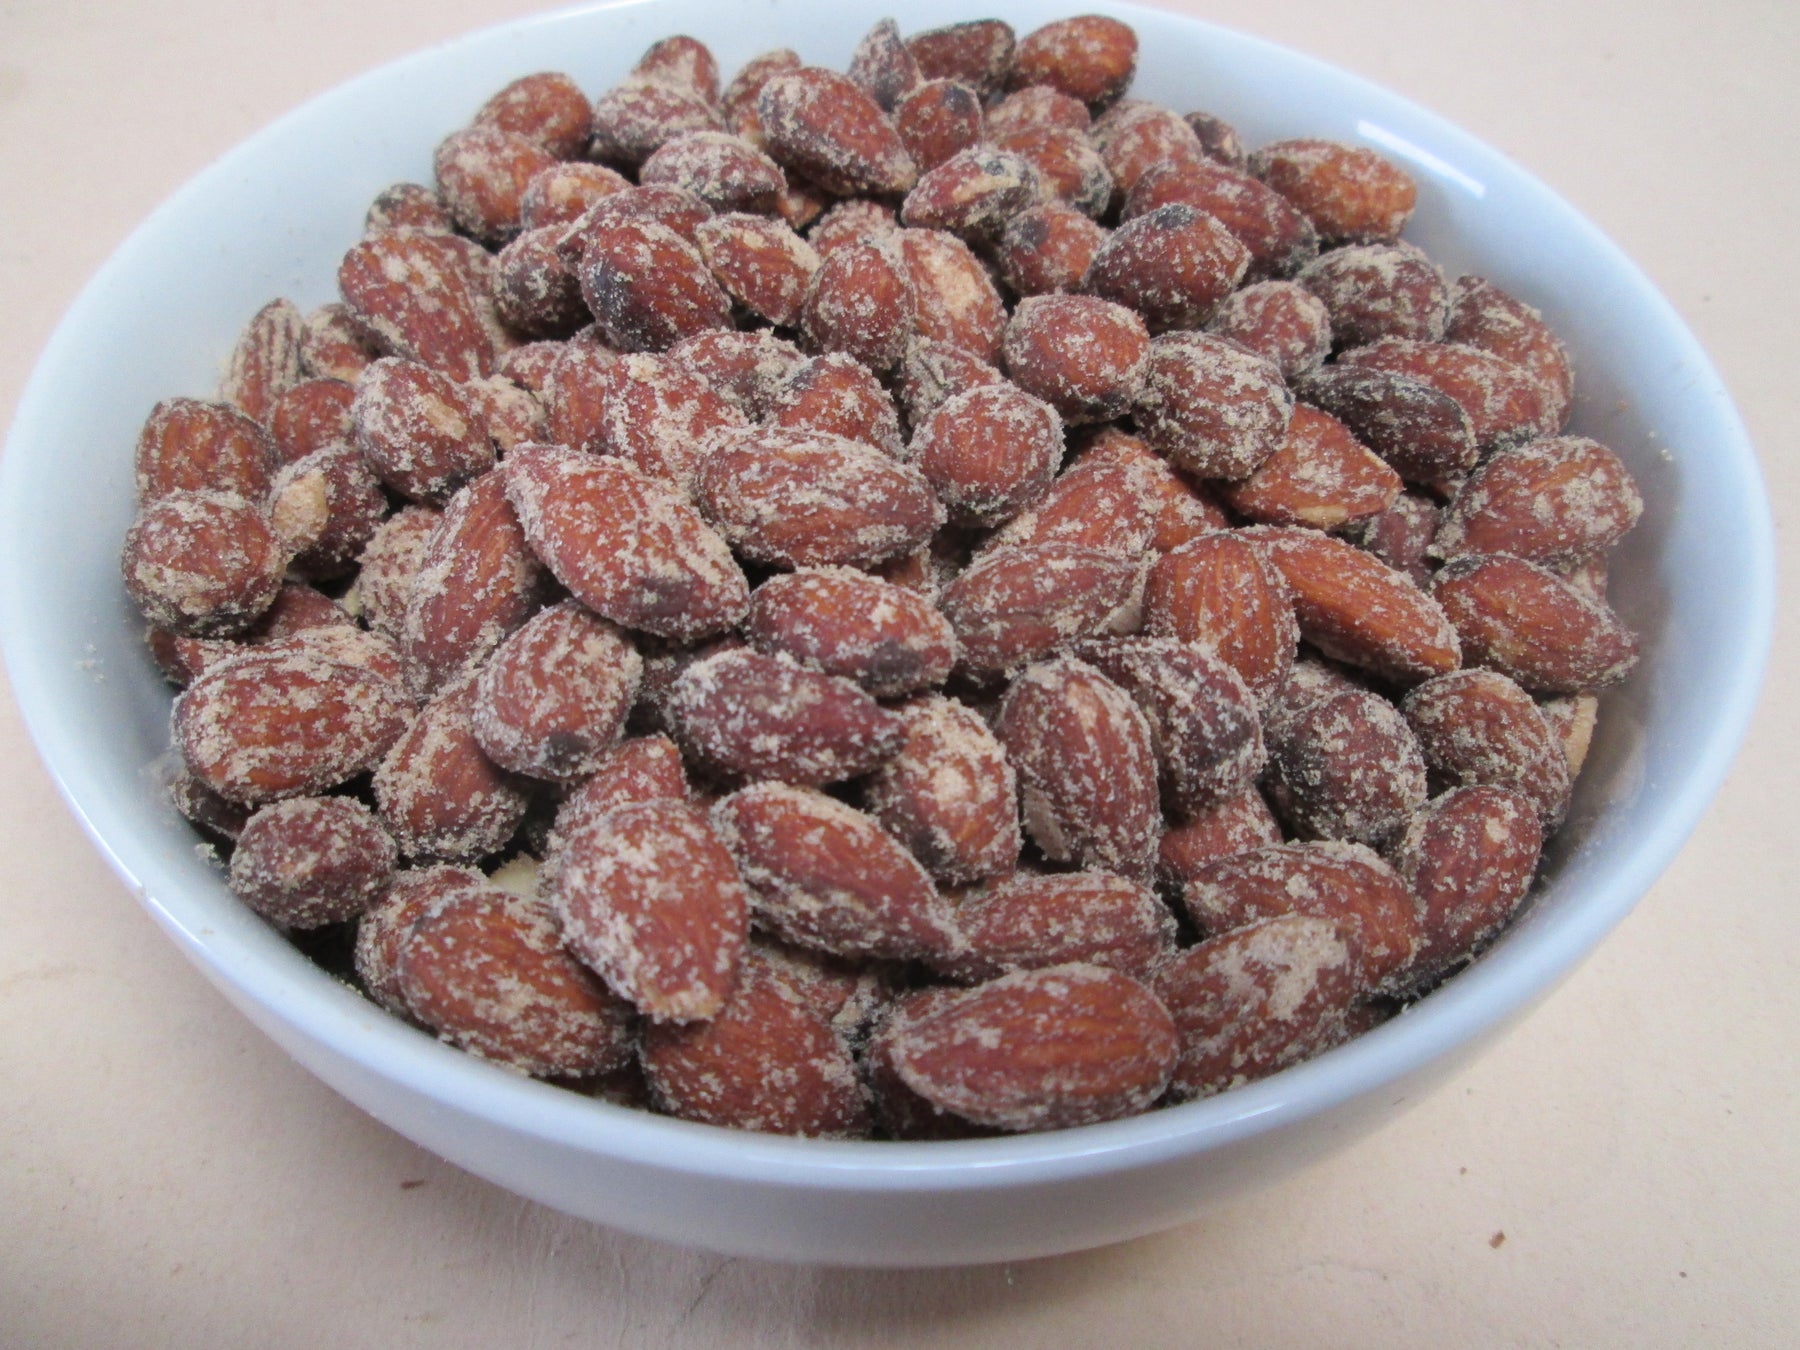 Smoked & Roasted Almonds, 25 lbs / case